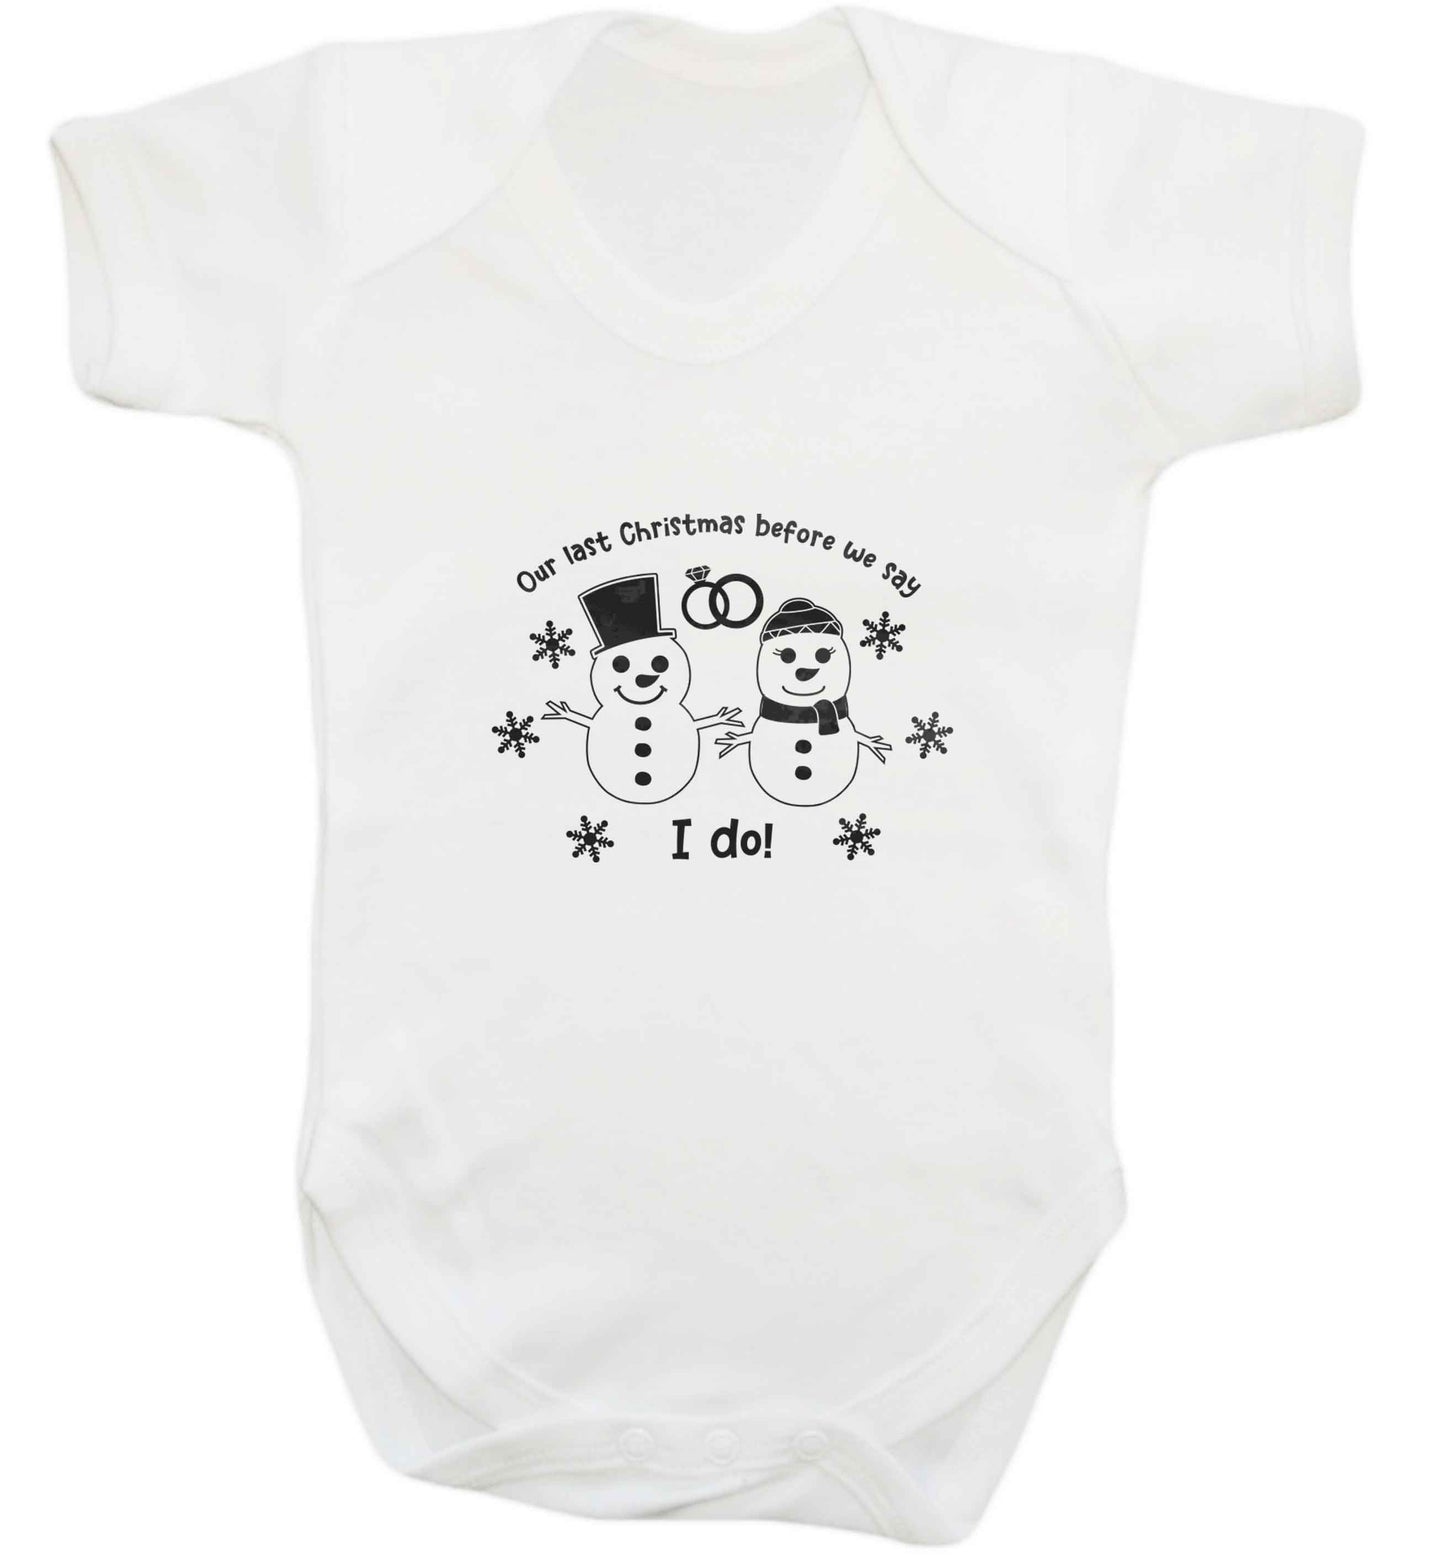 Last Christmas before we say I do baby vest white 18-24 months